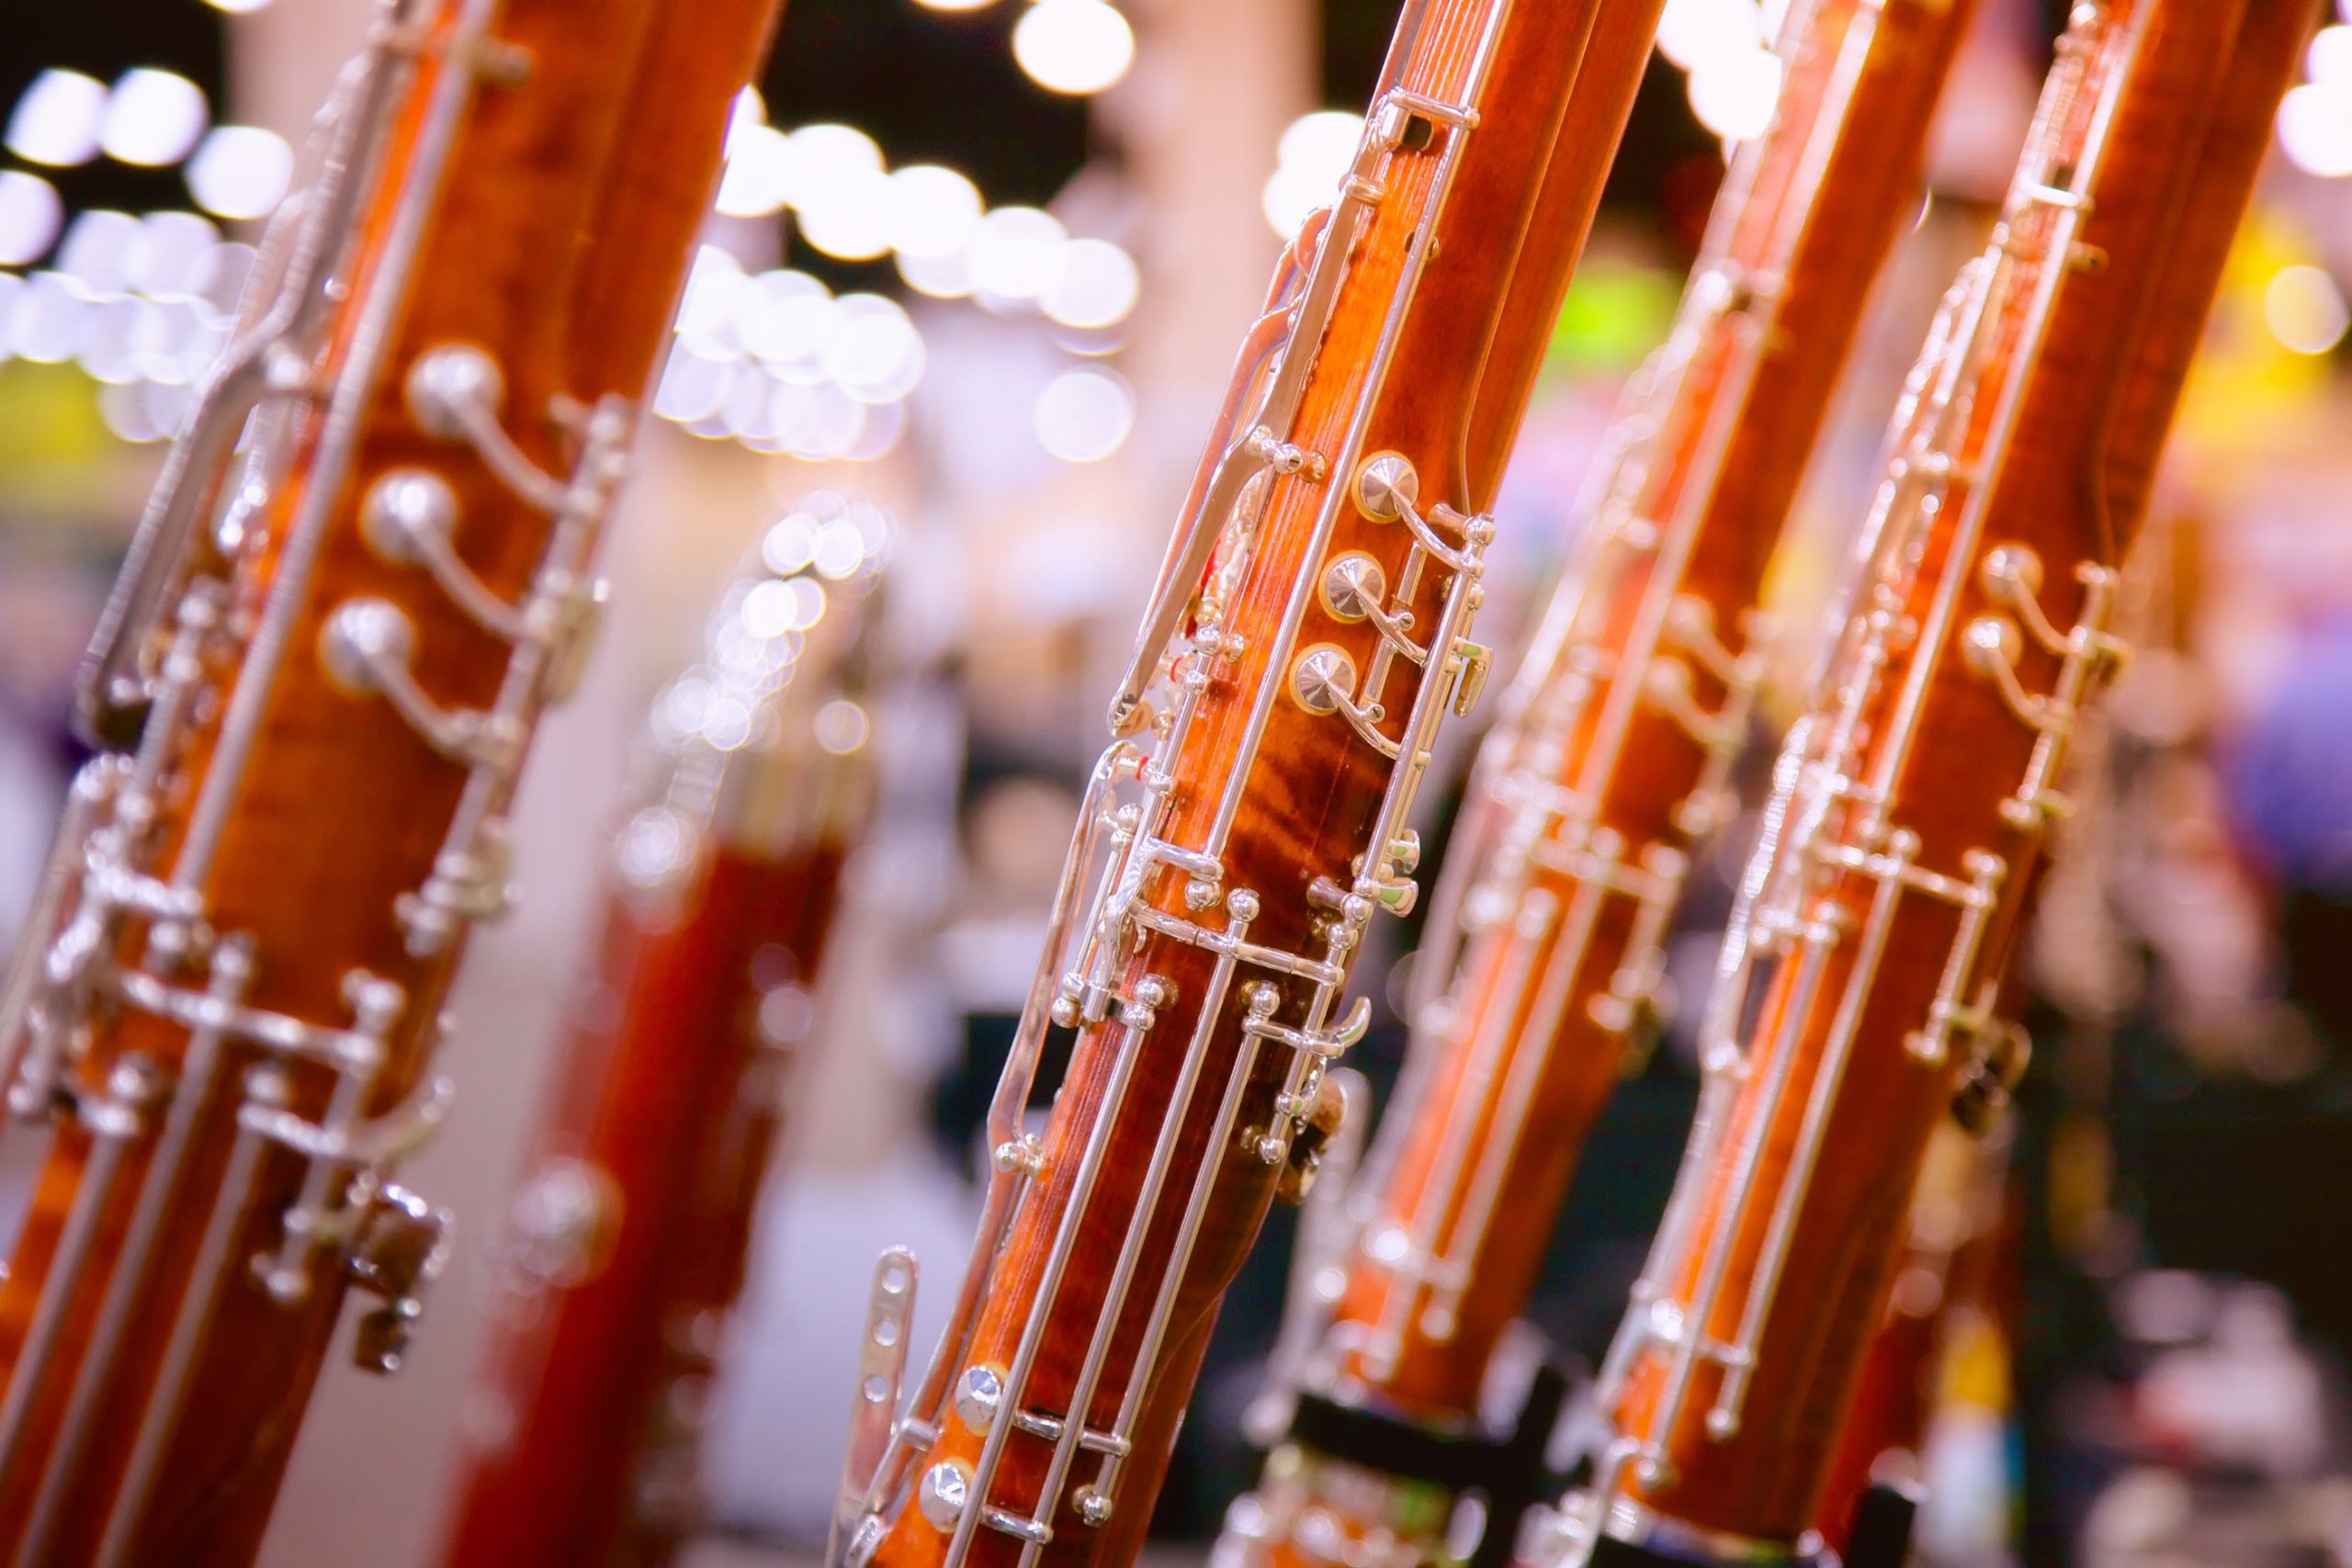 10 Reasons Why Moosmann is the Better Bassoon